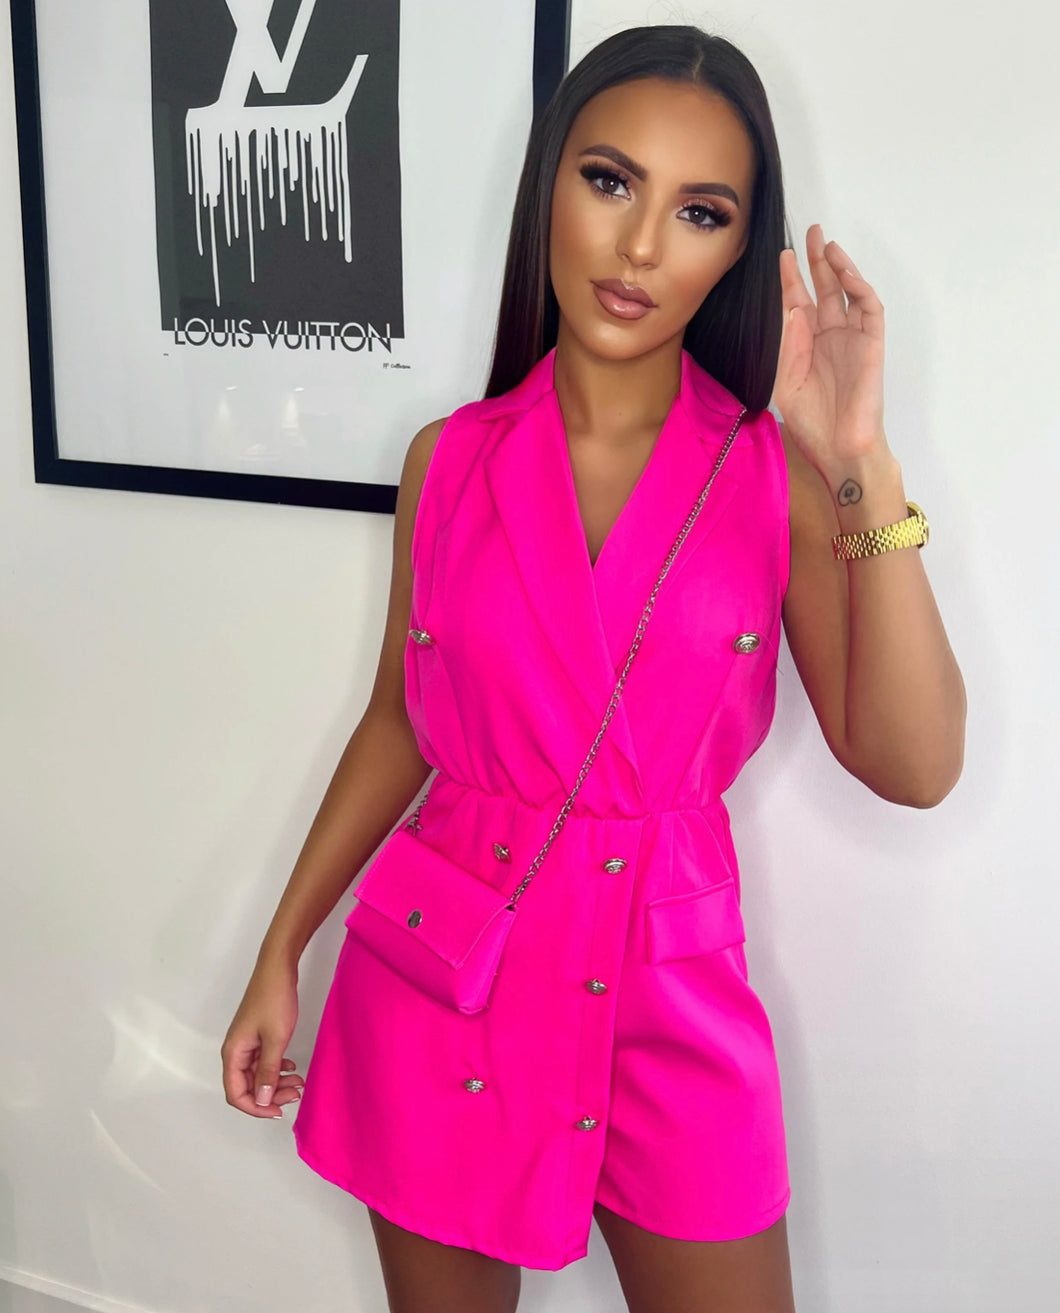 Hot Pink Kayleigh Playsuit with Matching Bag